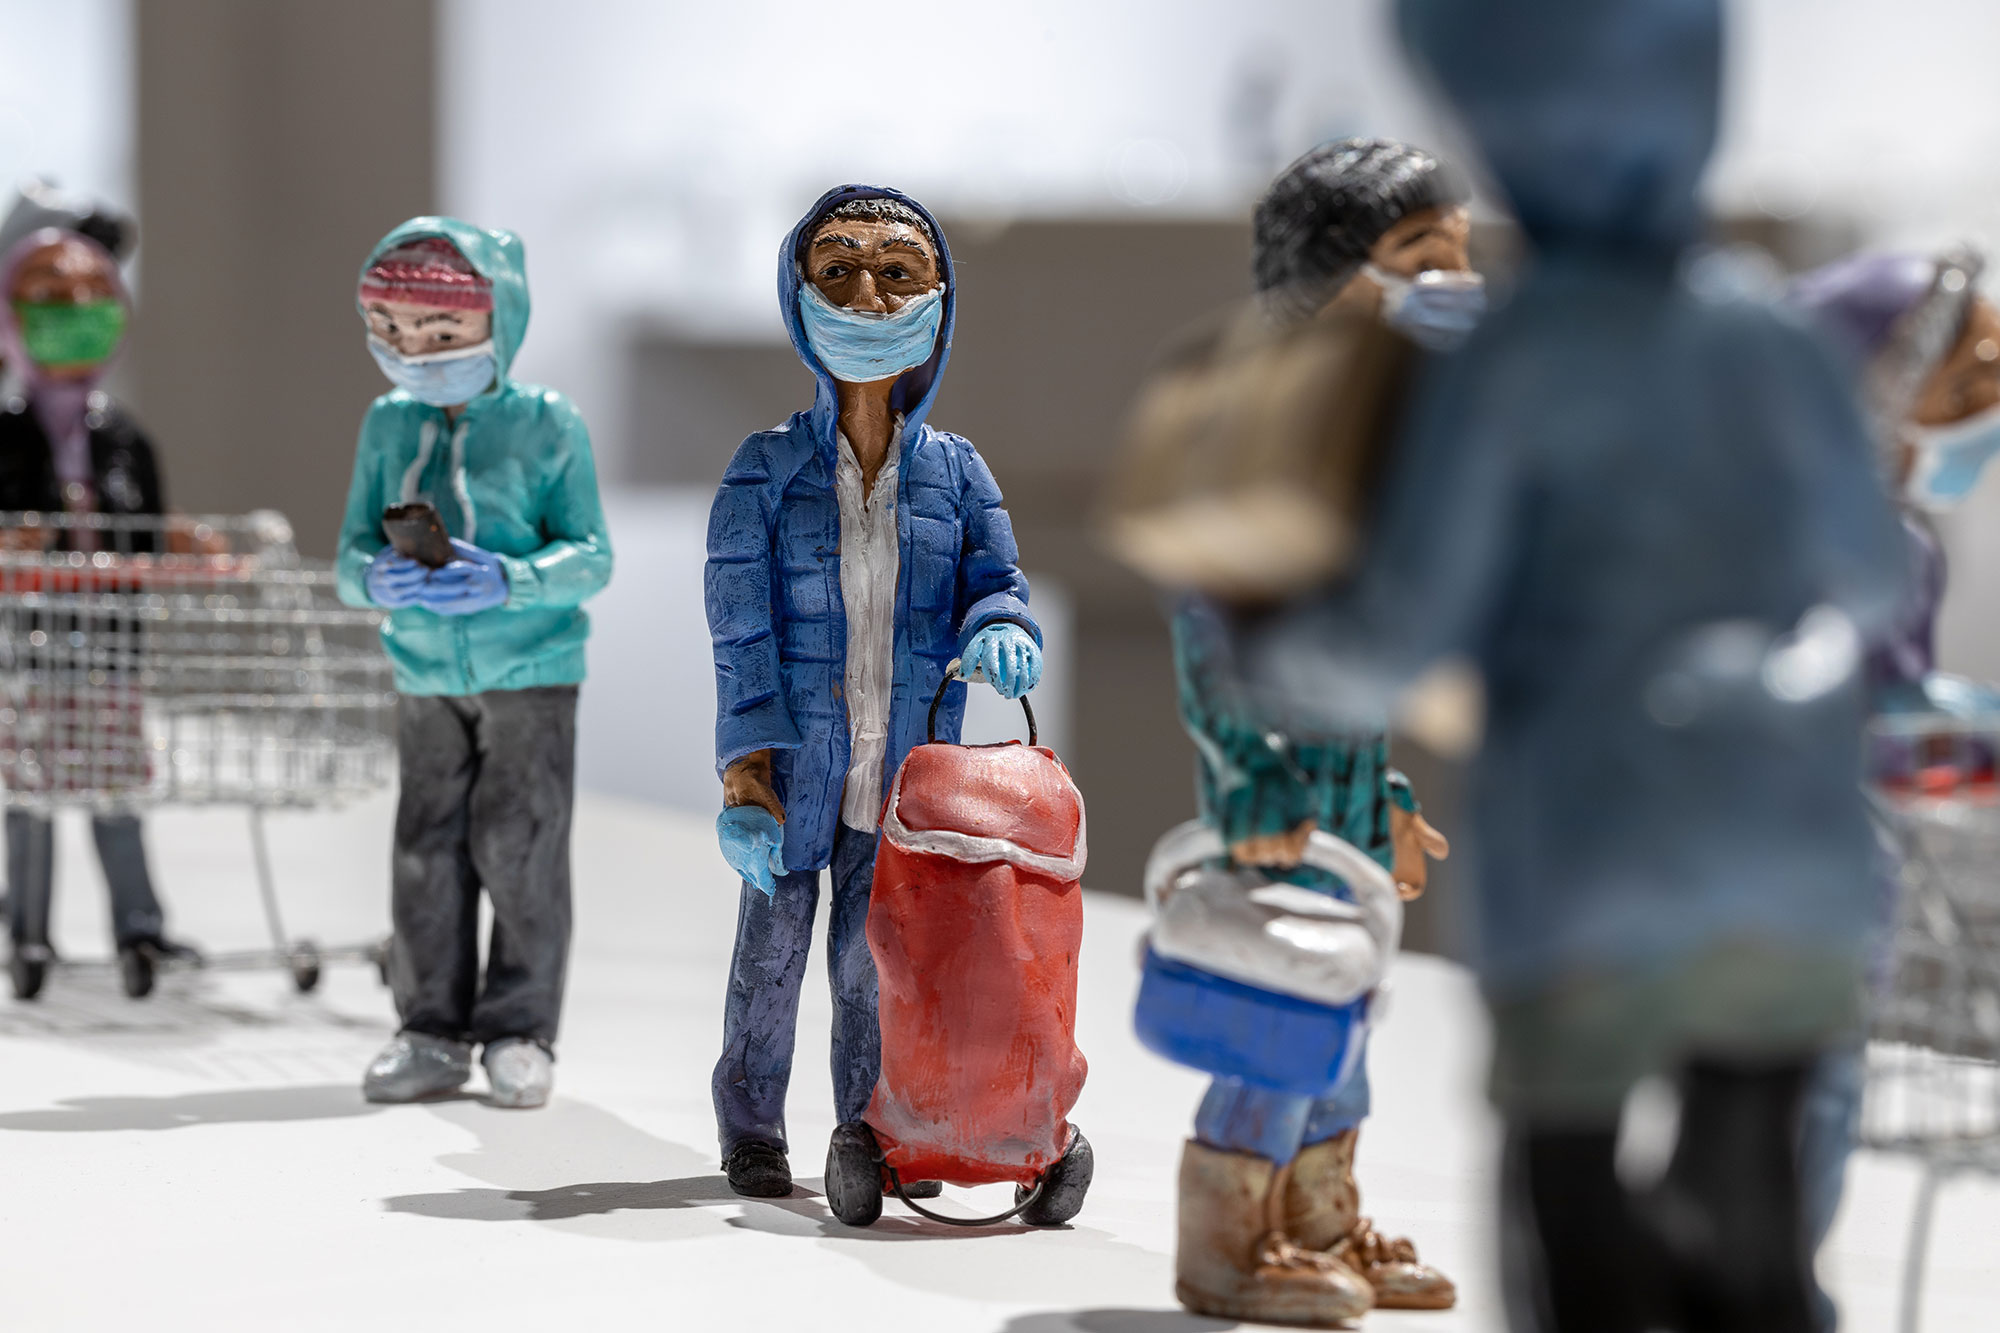 Masked polymer clay figures in a food bank line up